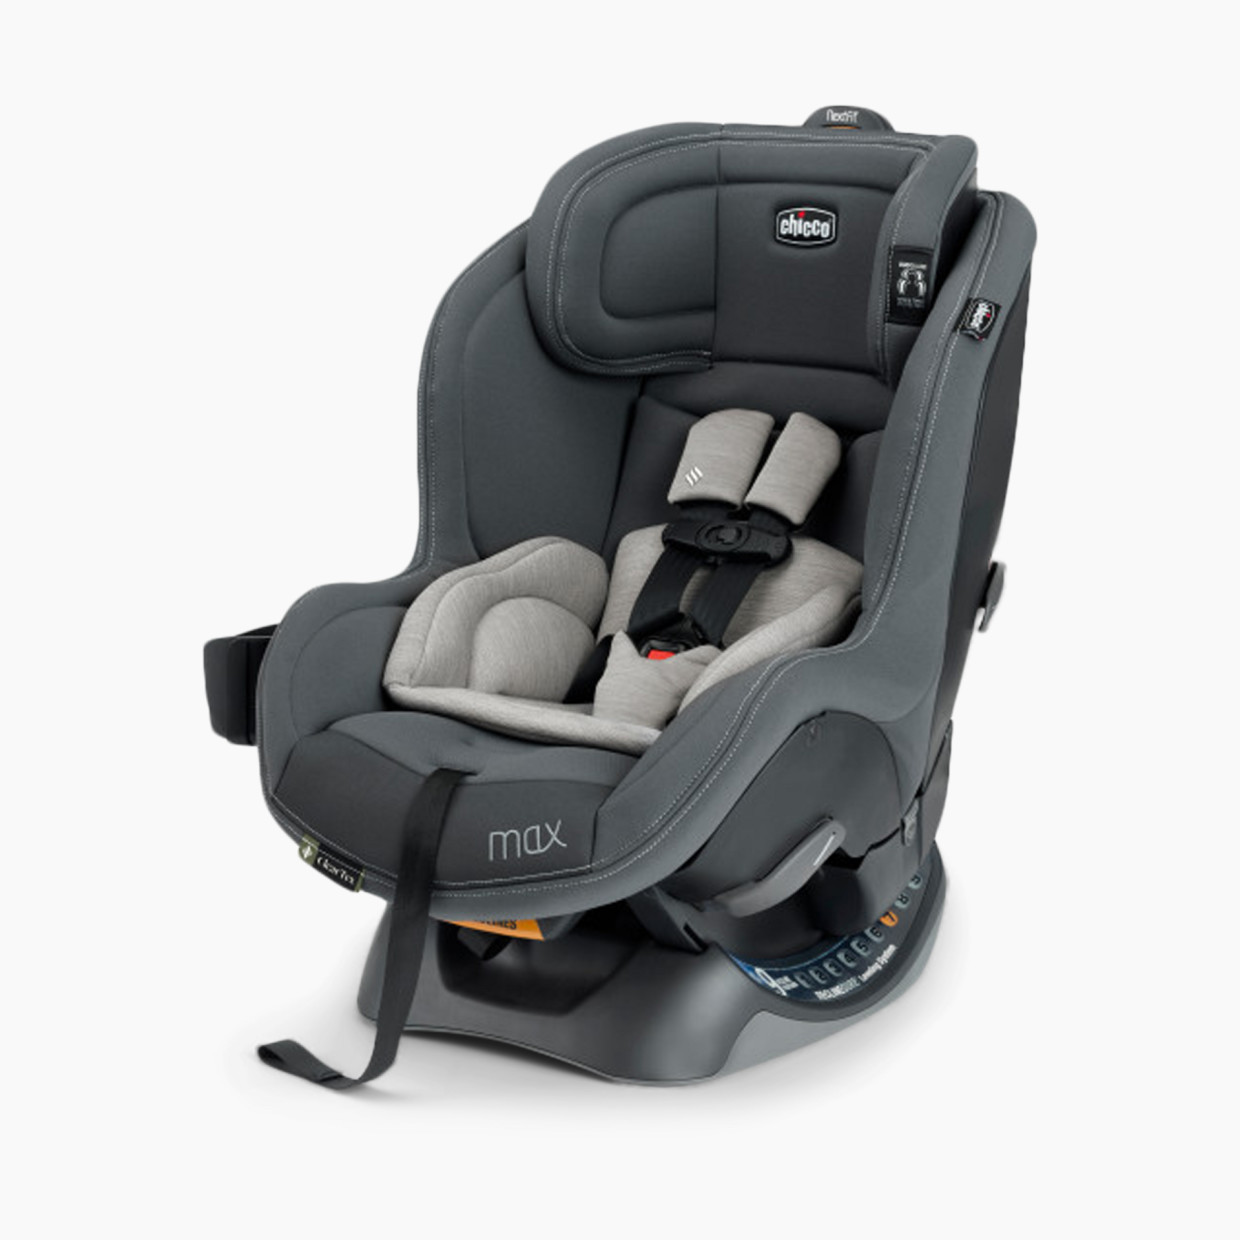 Chicco NextFit Max ClearTex Convertible Car Seat - Cove.